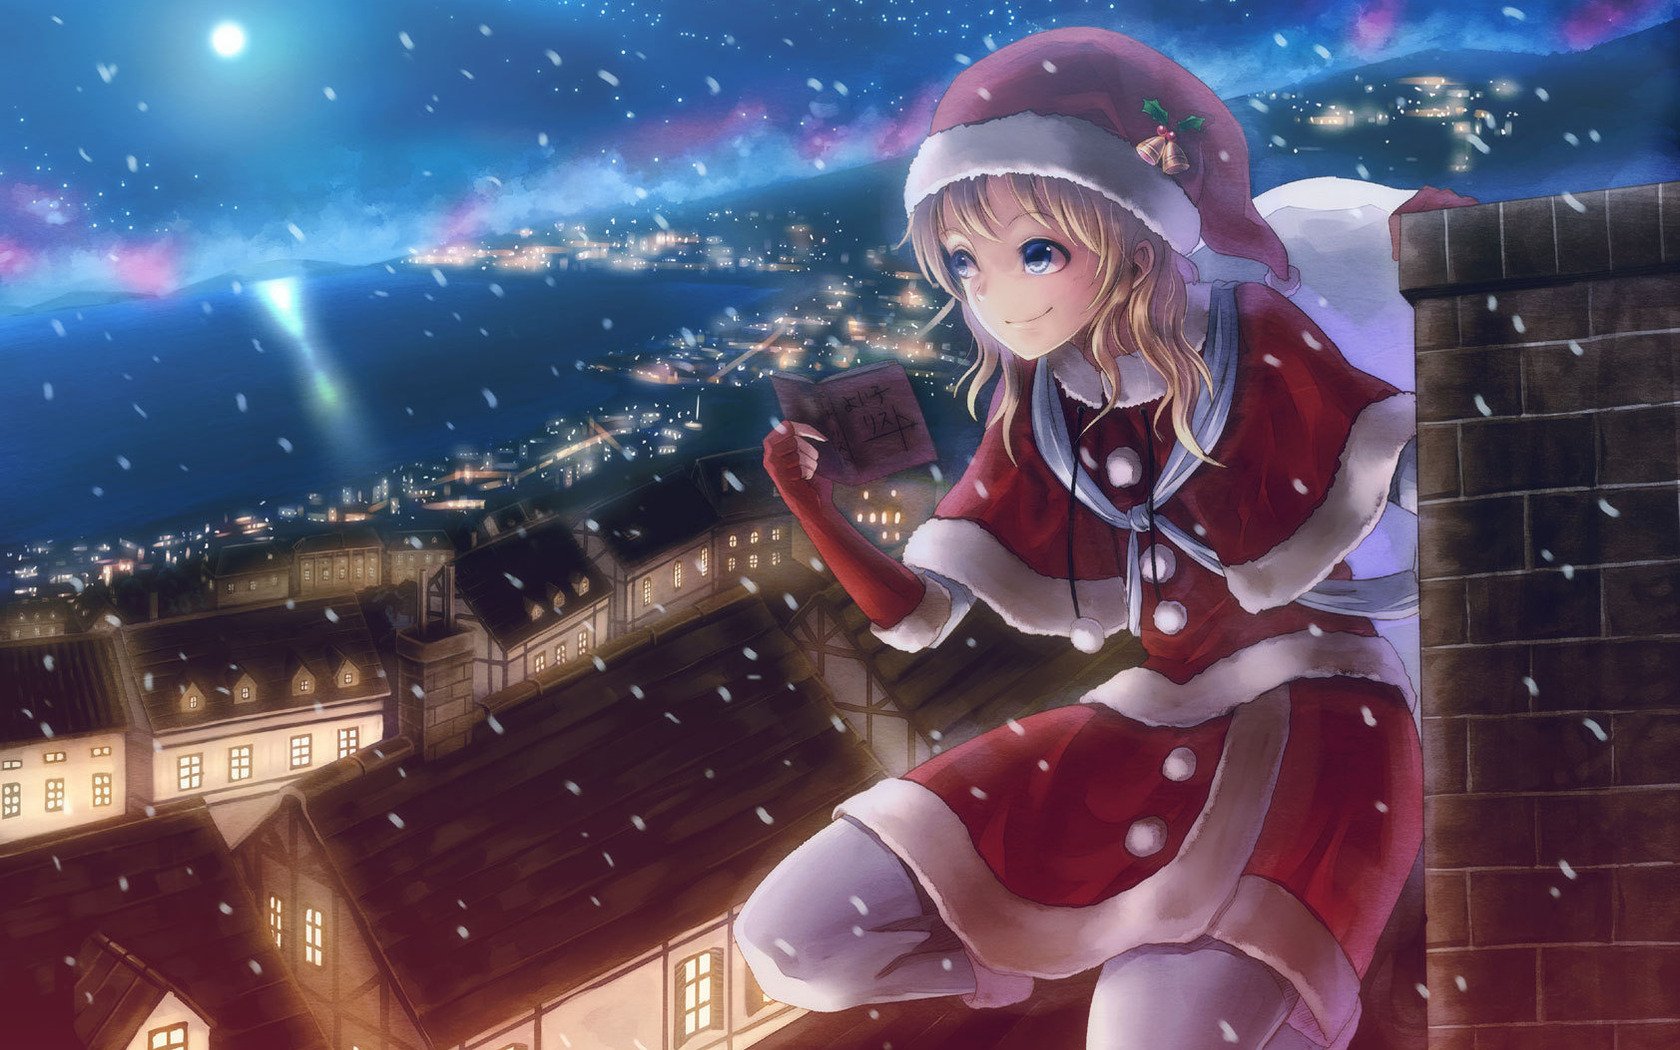 Anime Christmas Art by a href="https://alphacoders.com/author/view/189...